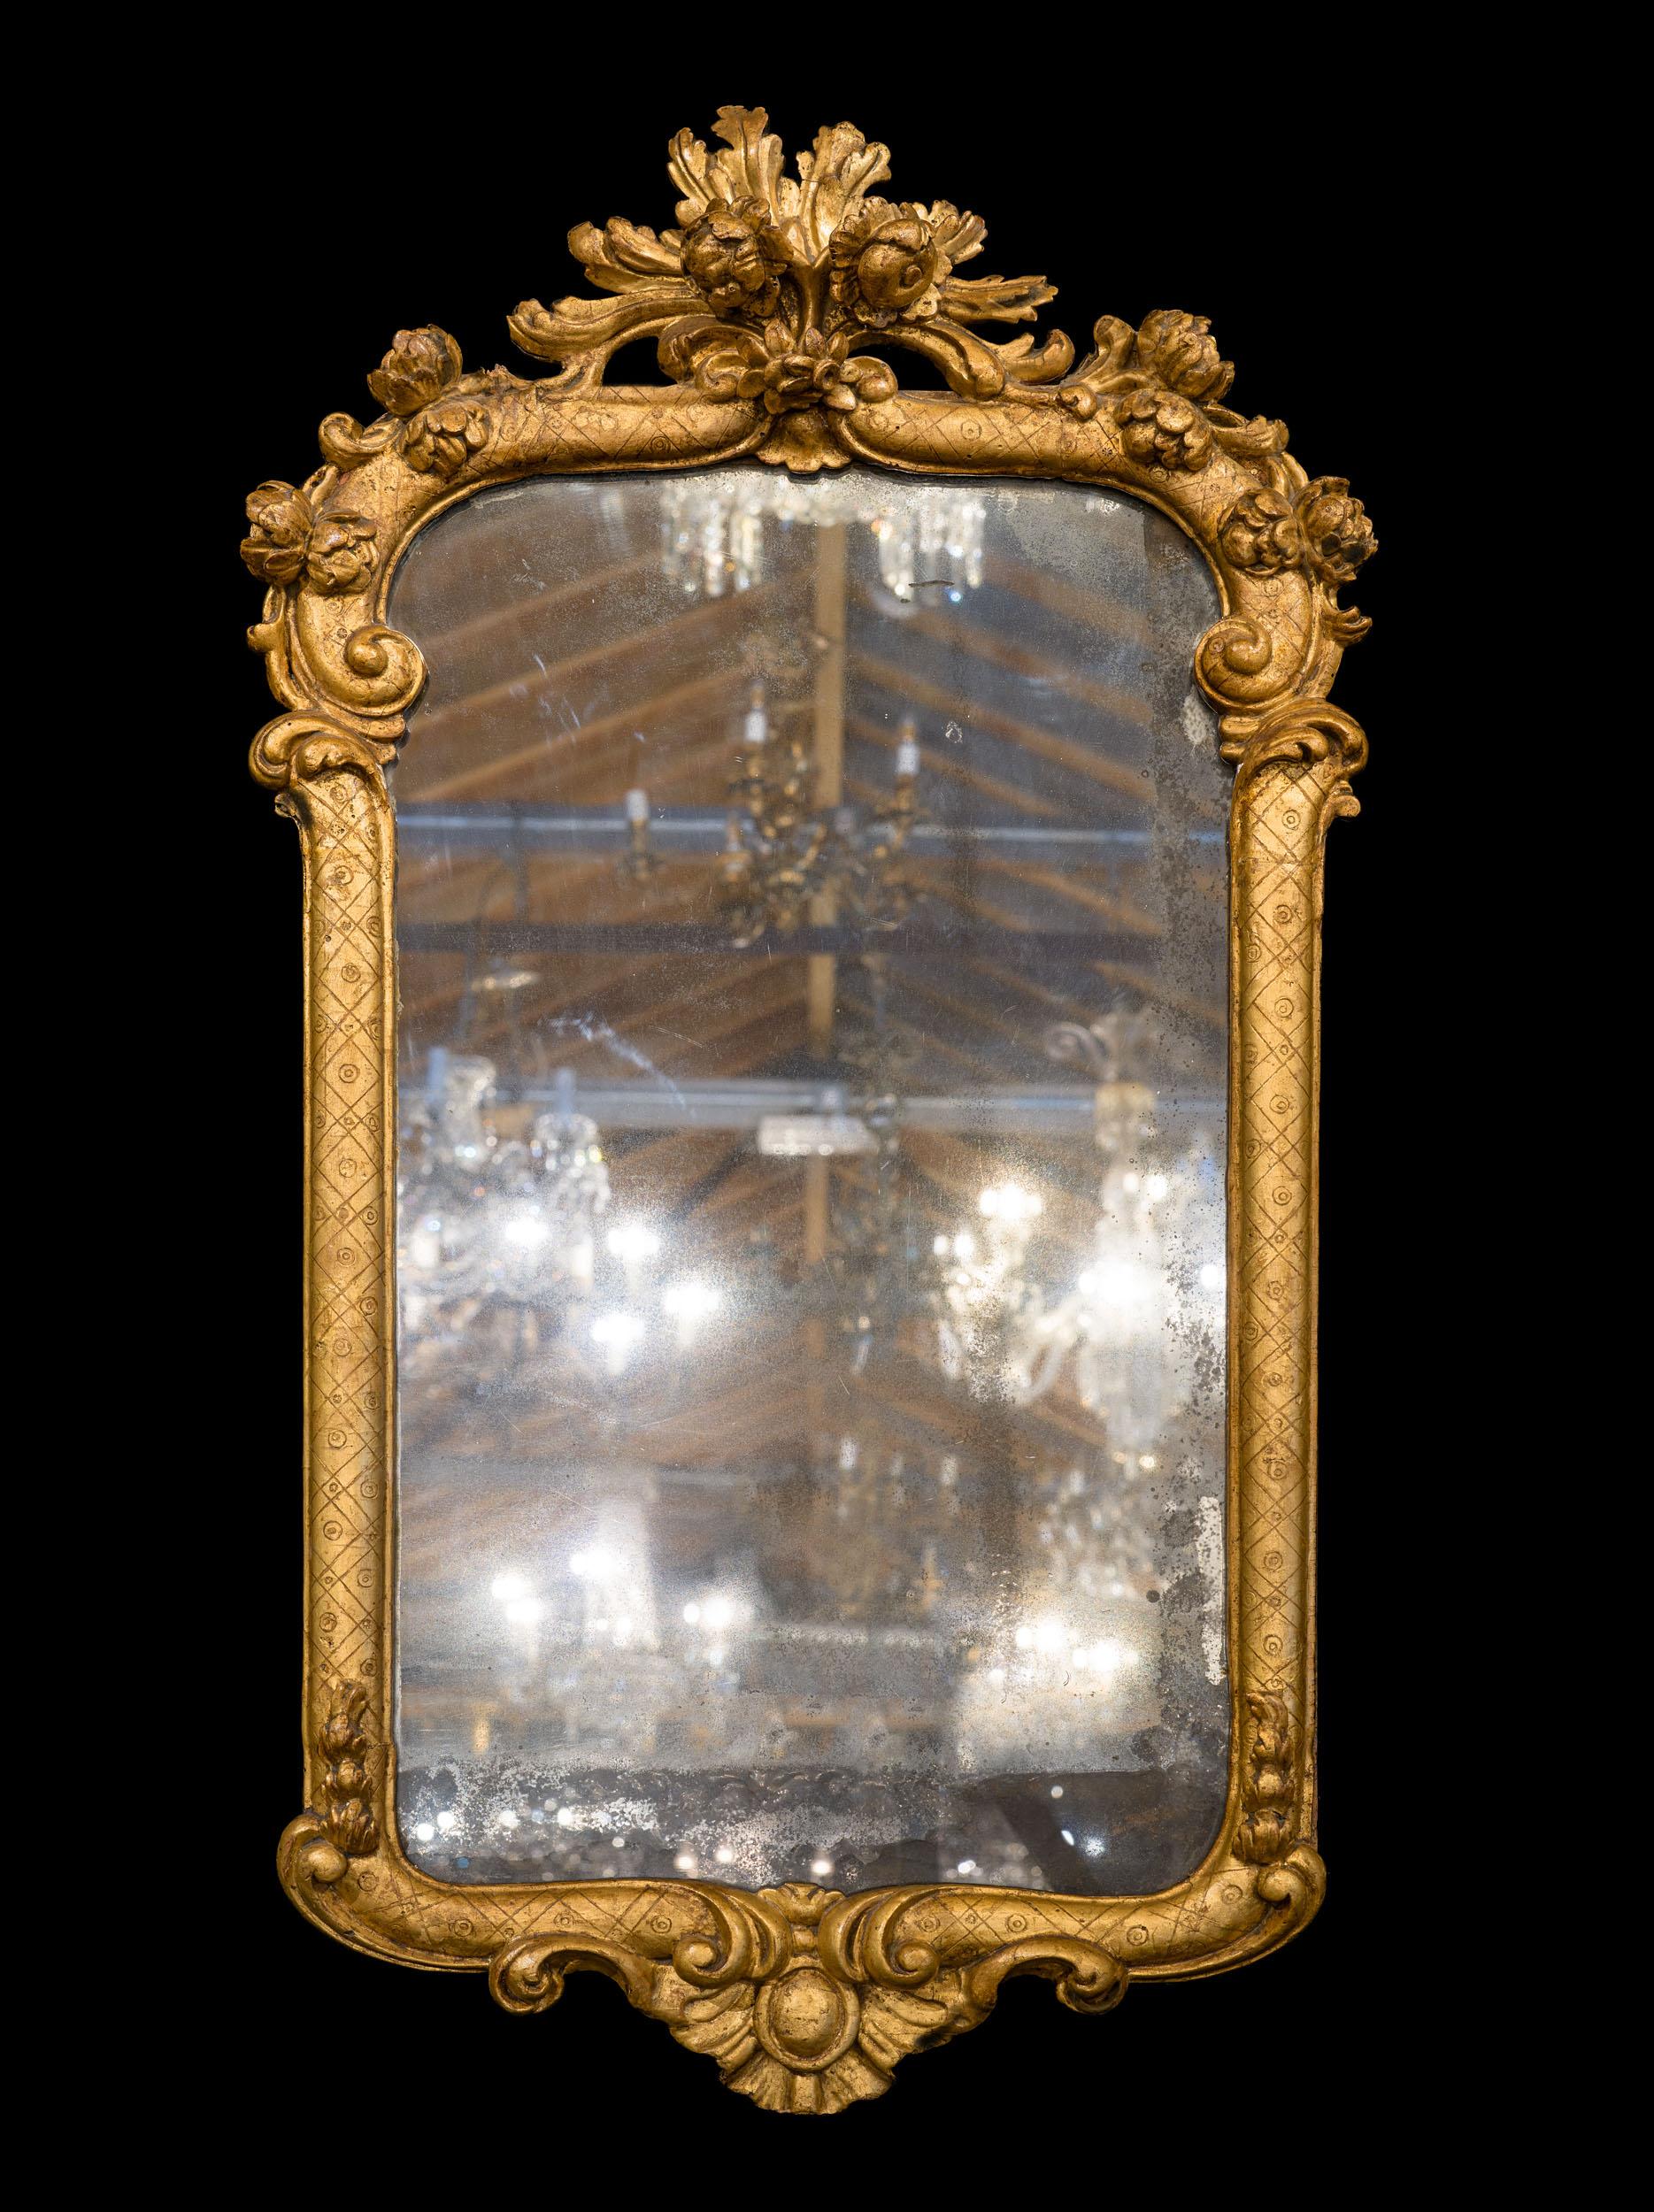 A charming eighteenth century wall mirror with an ogee shaped giltwood frame, surmounted by a foliate and floral crest comprising oak leaves and roses. These trail over the scrolled shoulders, the rest of the frame decorated with cross hatching.